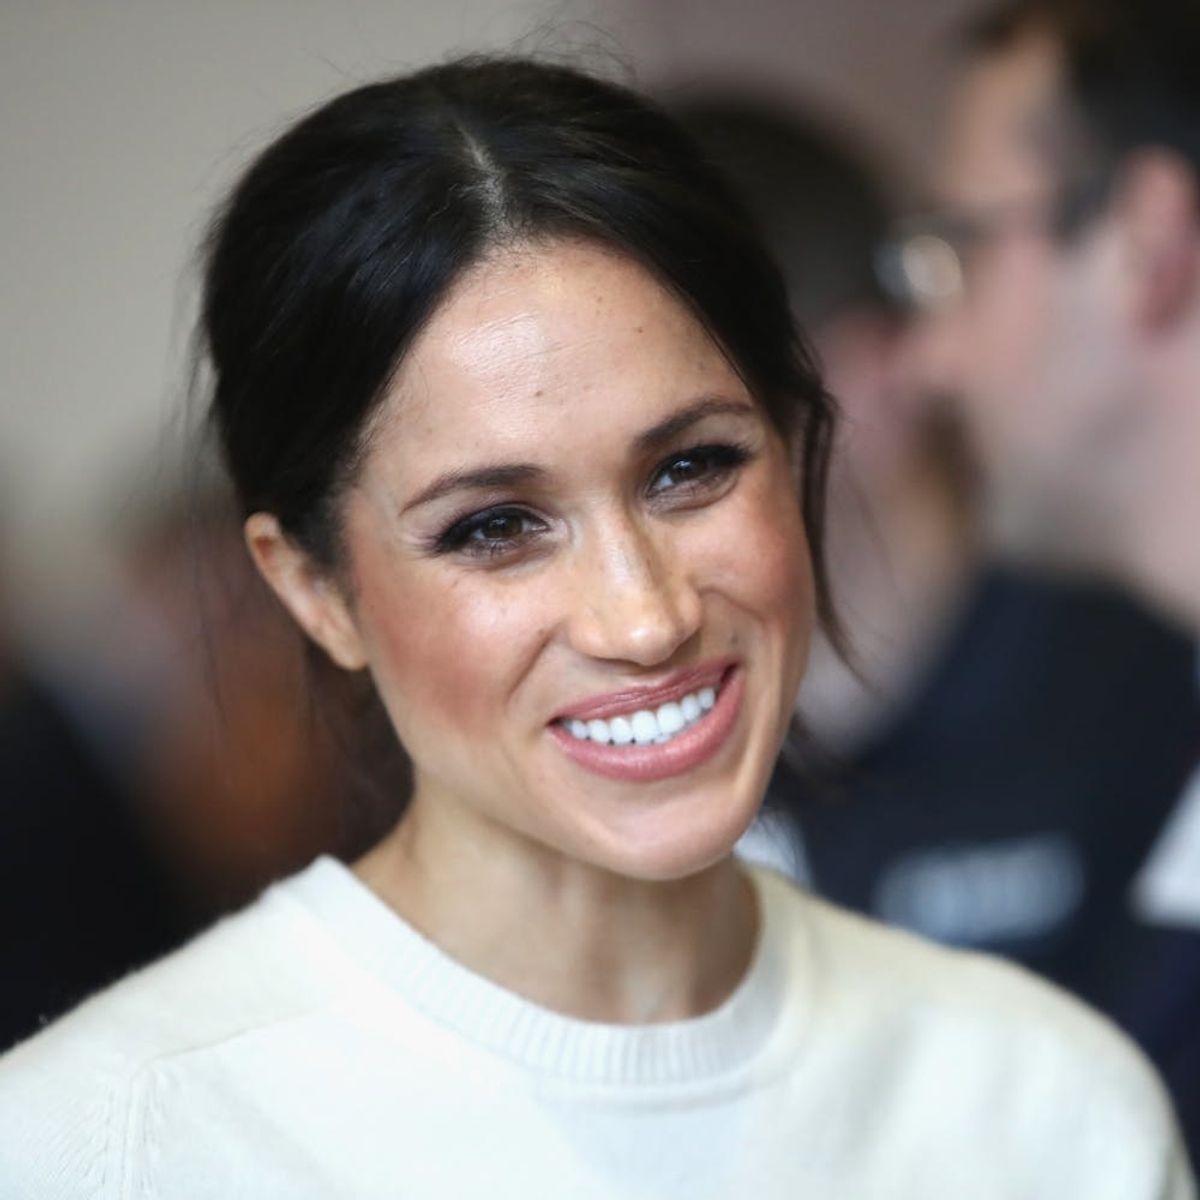 Meghan Markle Has Asked Prince Charles to Walk Her Down the Aisle